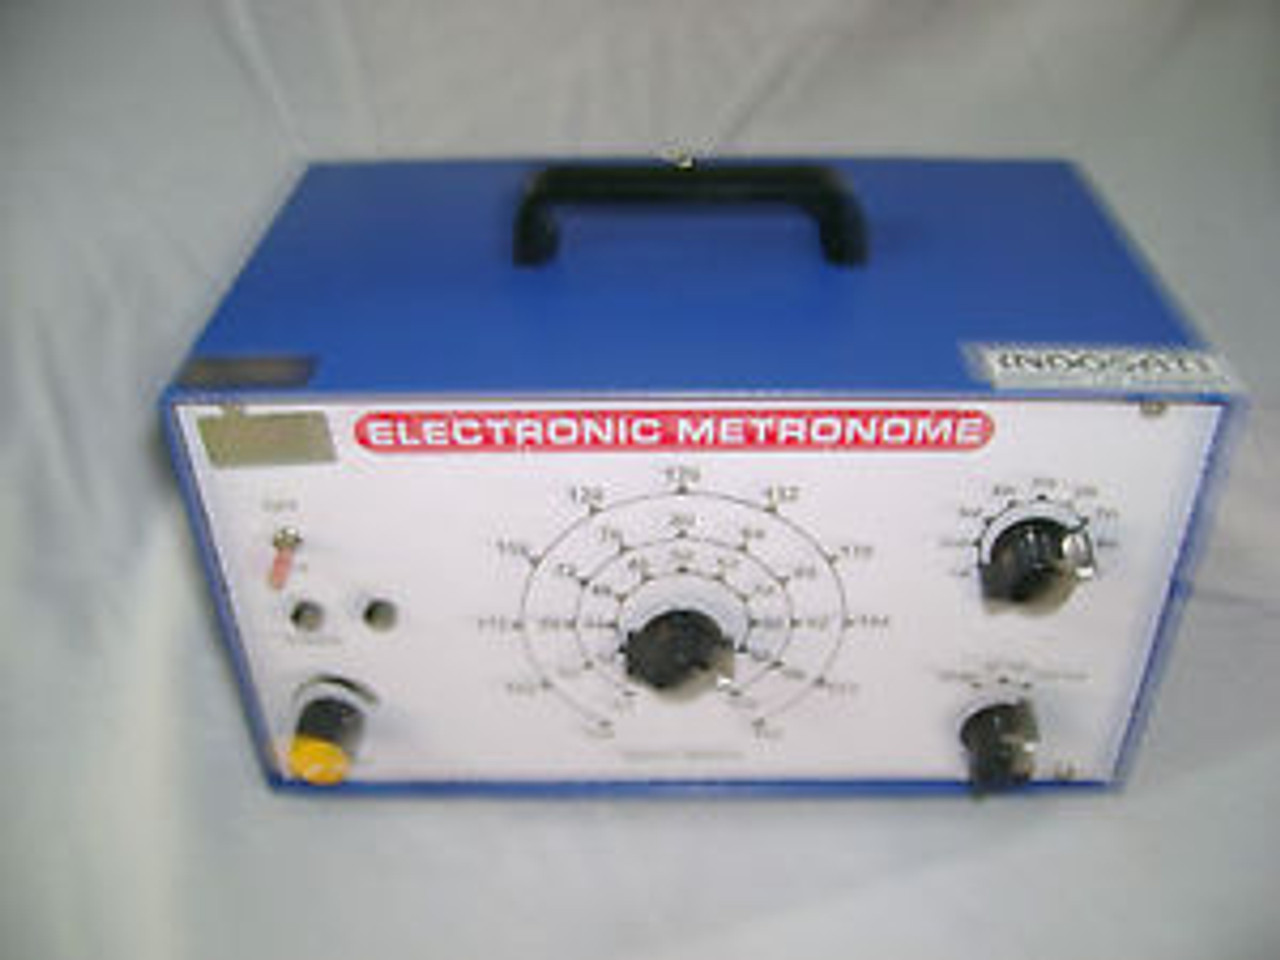 Electronic Metronome, : Bernell Corporation